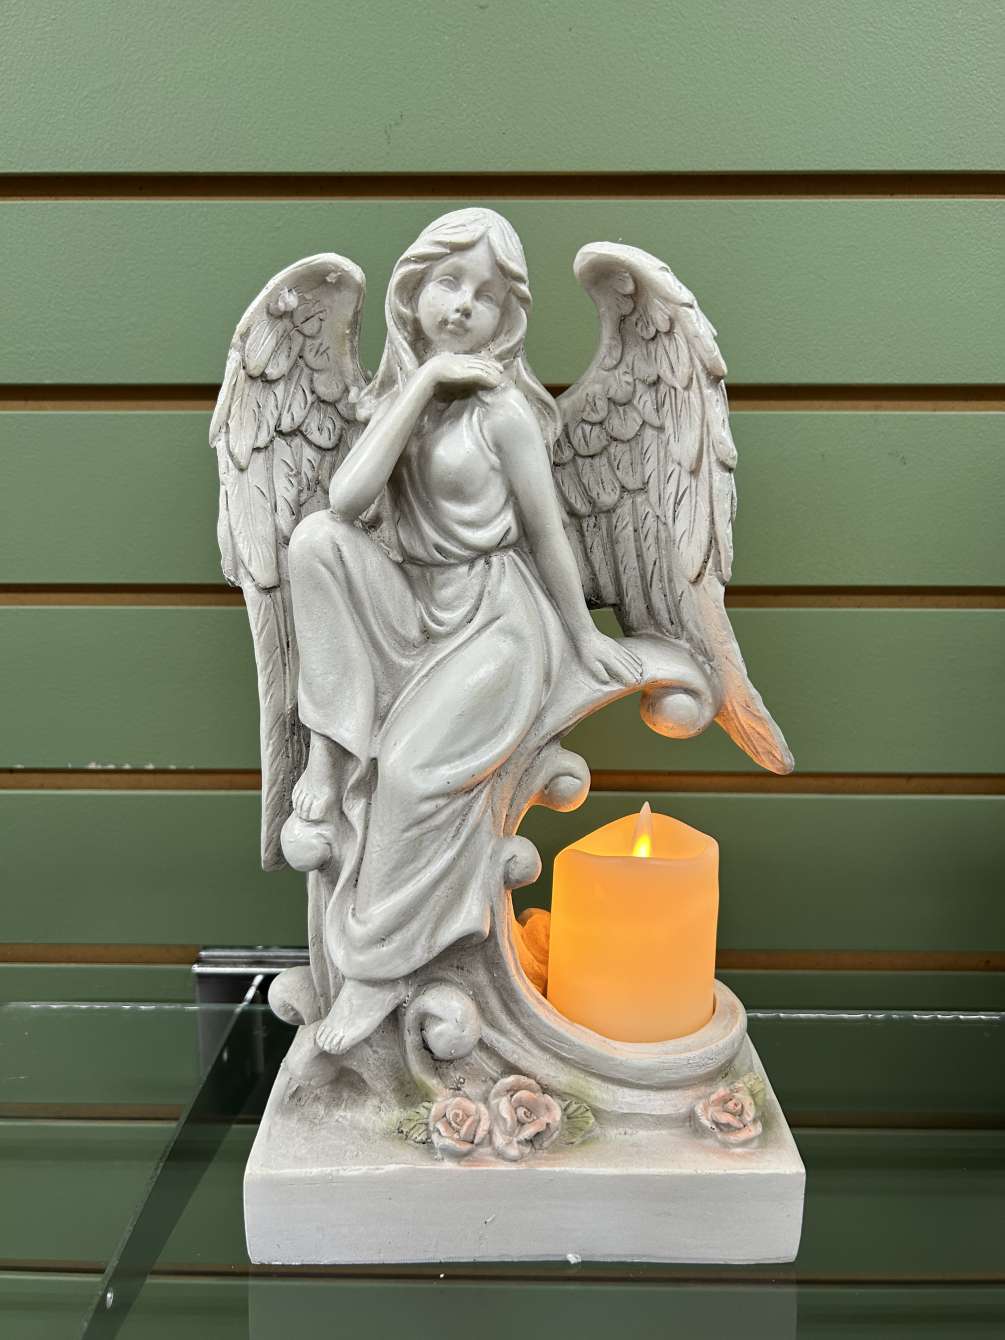 This combination of an angel memorial statue and an LED flameless candle